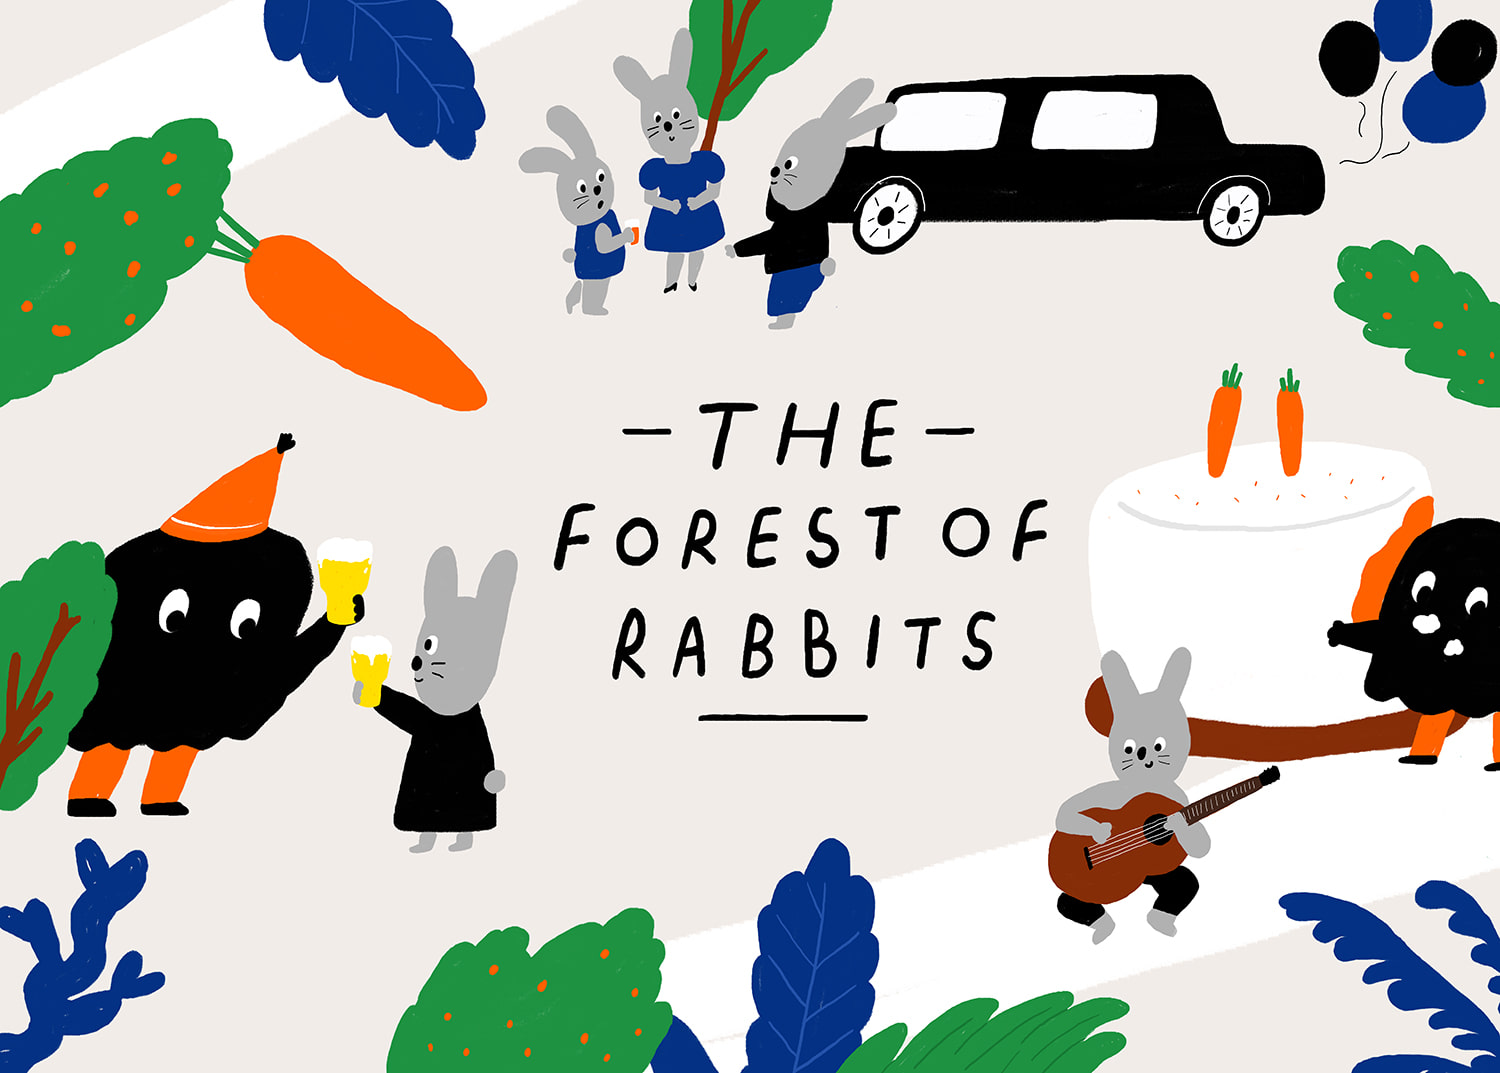 THE FOREST OF RABBITS